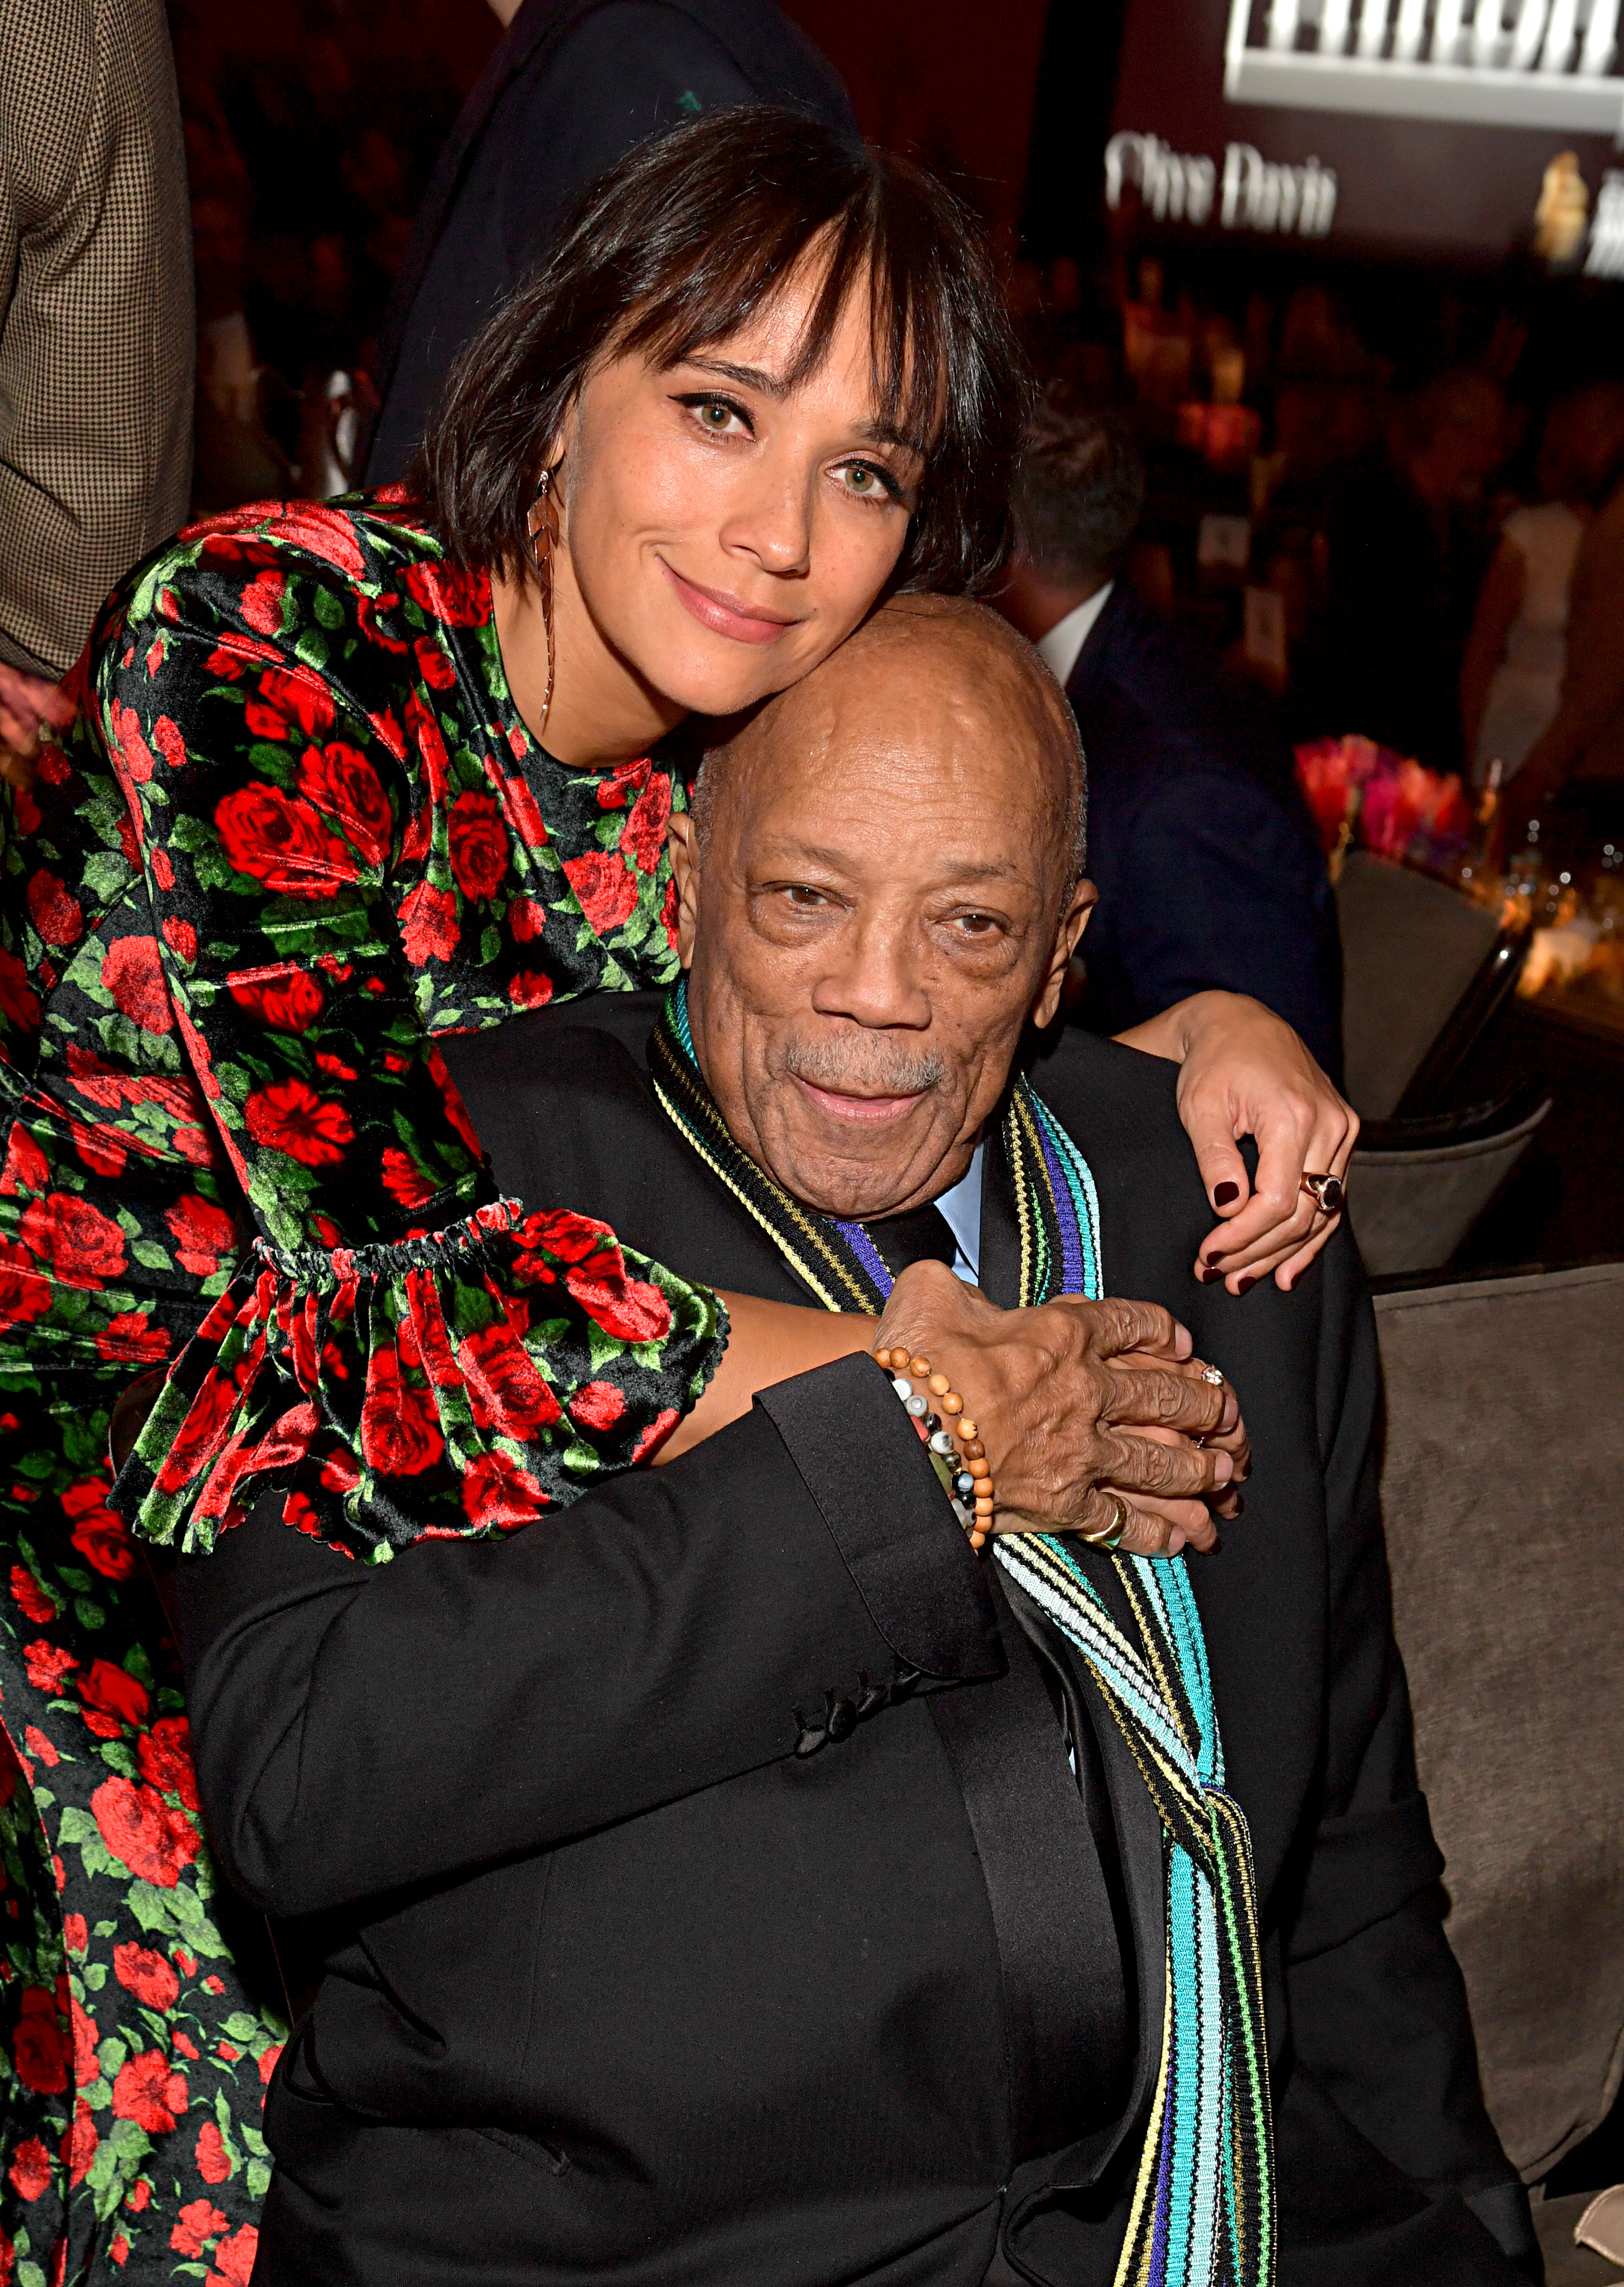 Rashida Jones and Quincy Jones are pictured at the Pre-GRAMMY Gala and GRAMMY Salute to Industry Icons Honoring Sean "Diddy" Combs on January 25, 2020, in Beverly Hills, California | Source: Getty Images